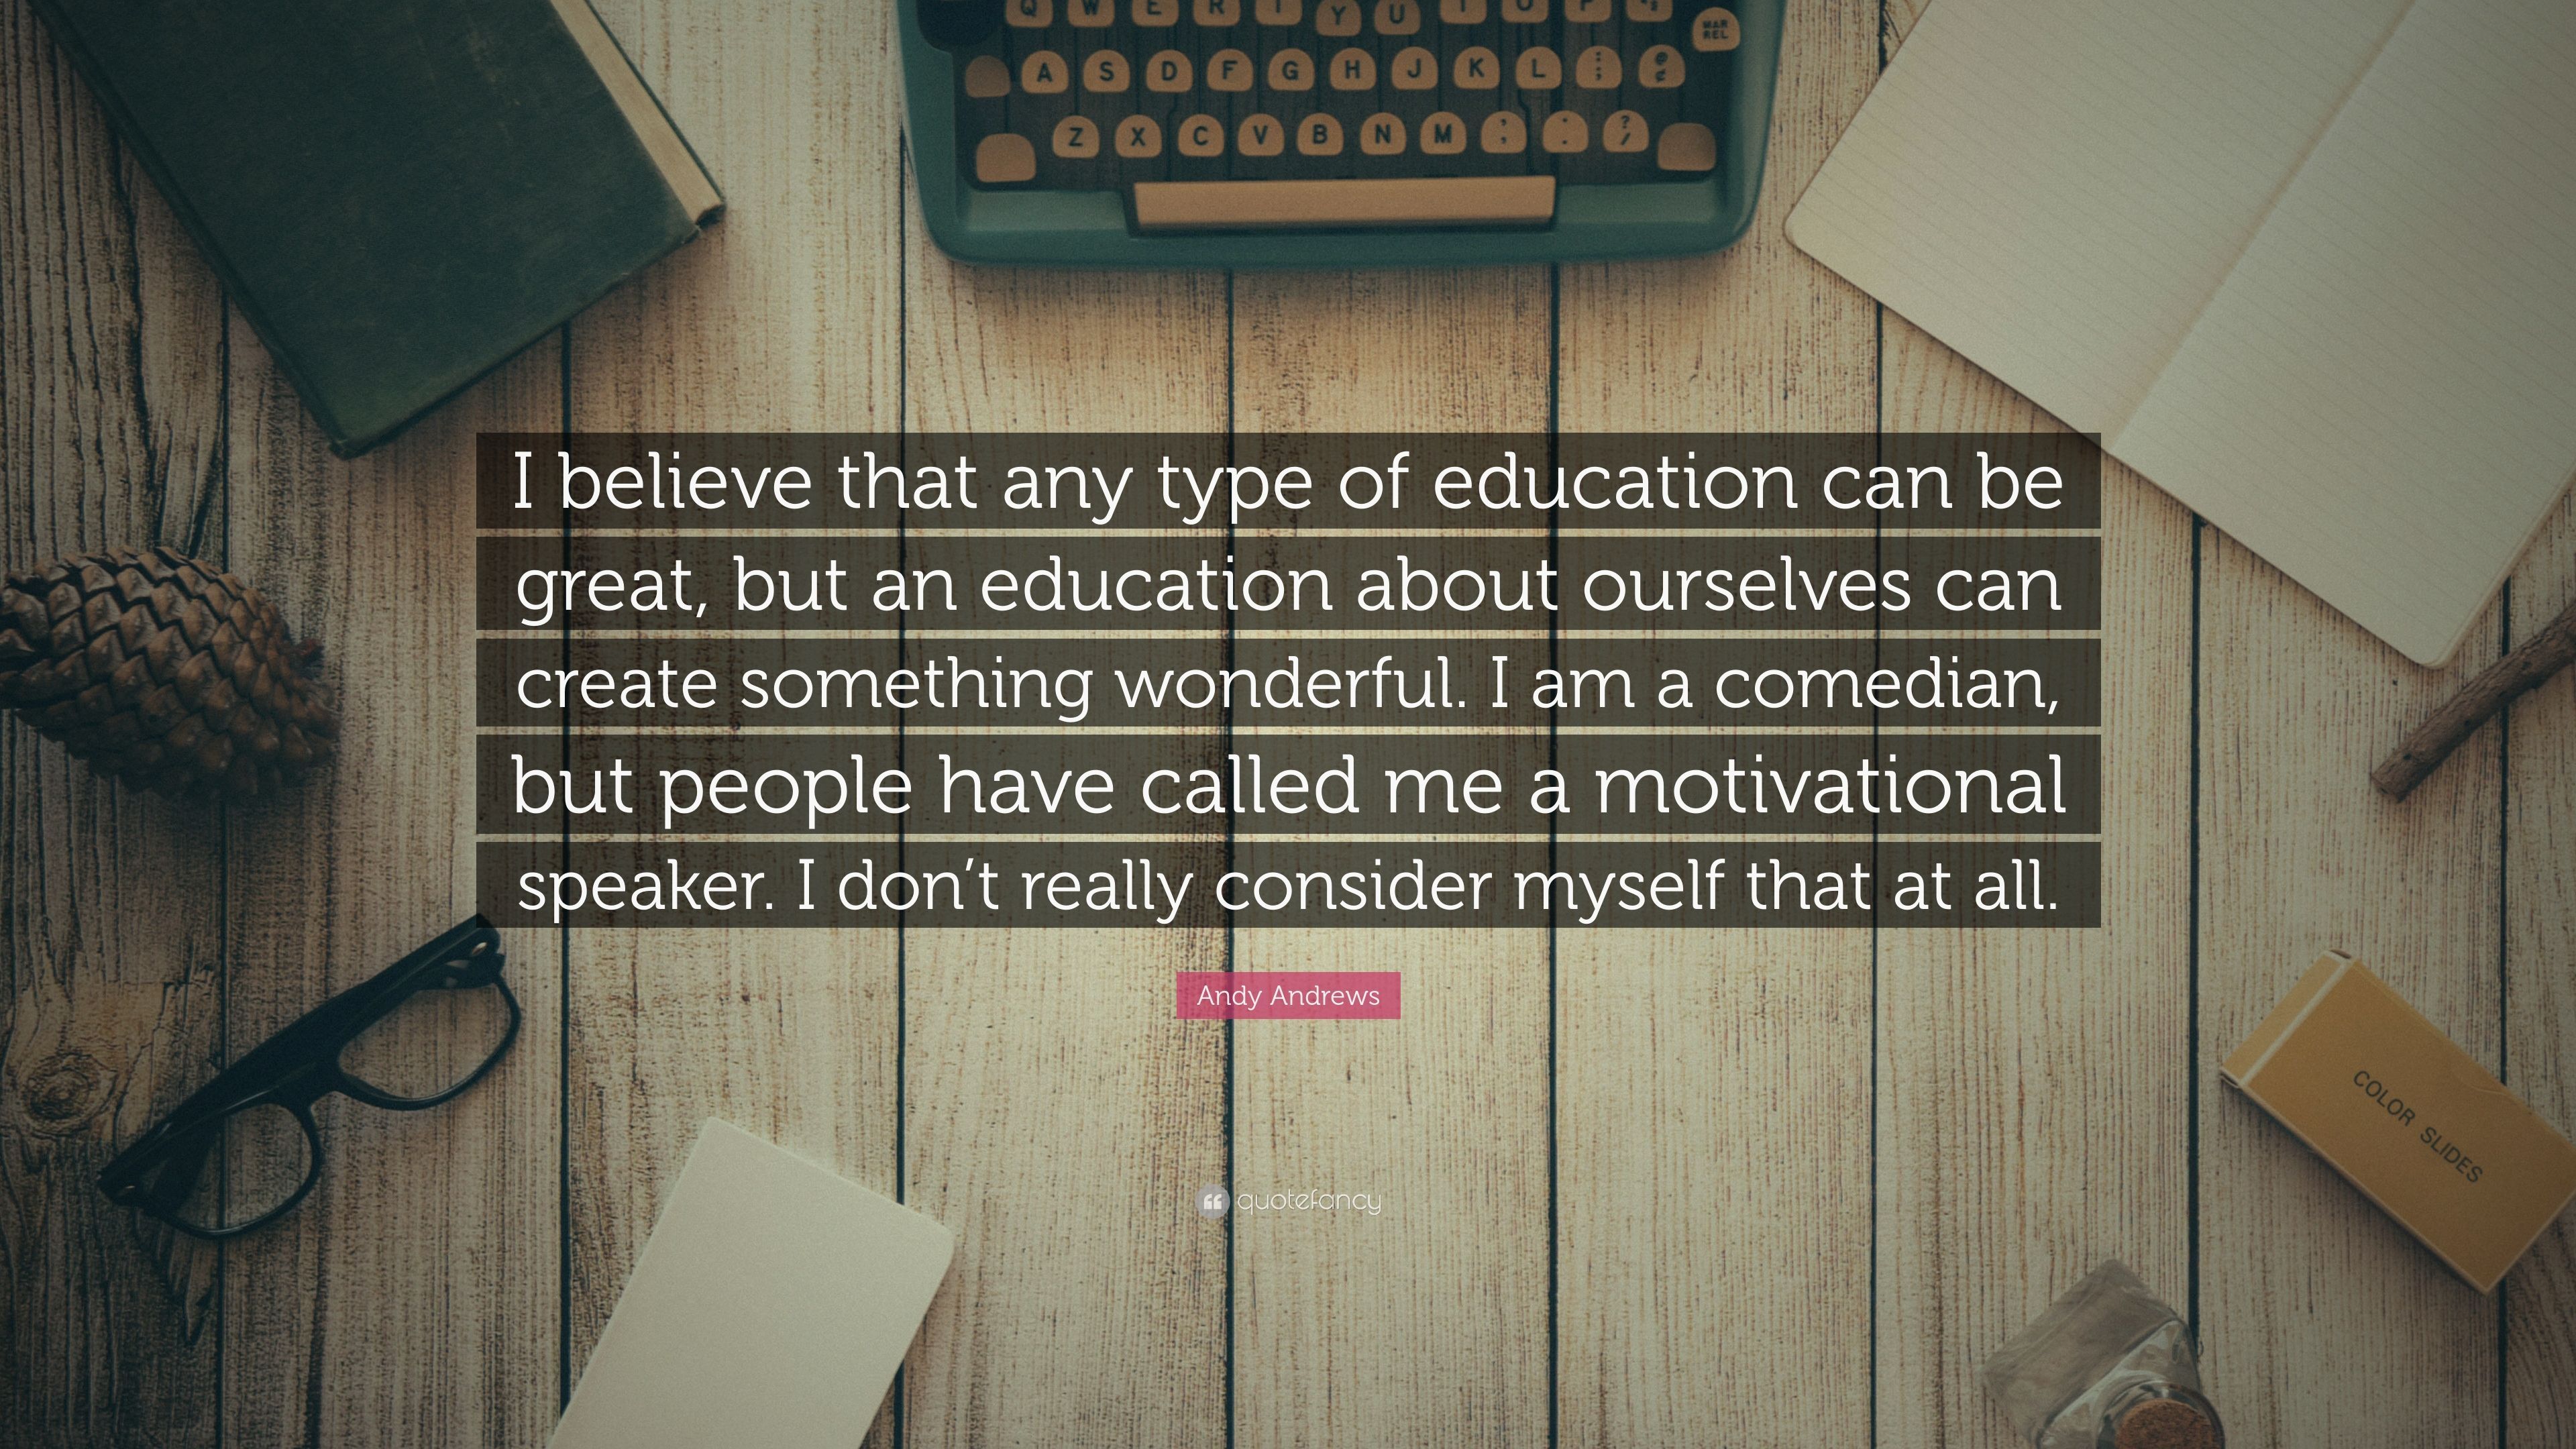 Andy Andrews Quote: "I believe that any type of education can be great